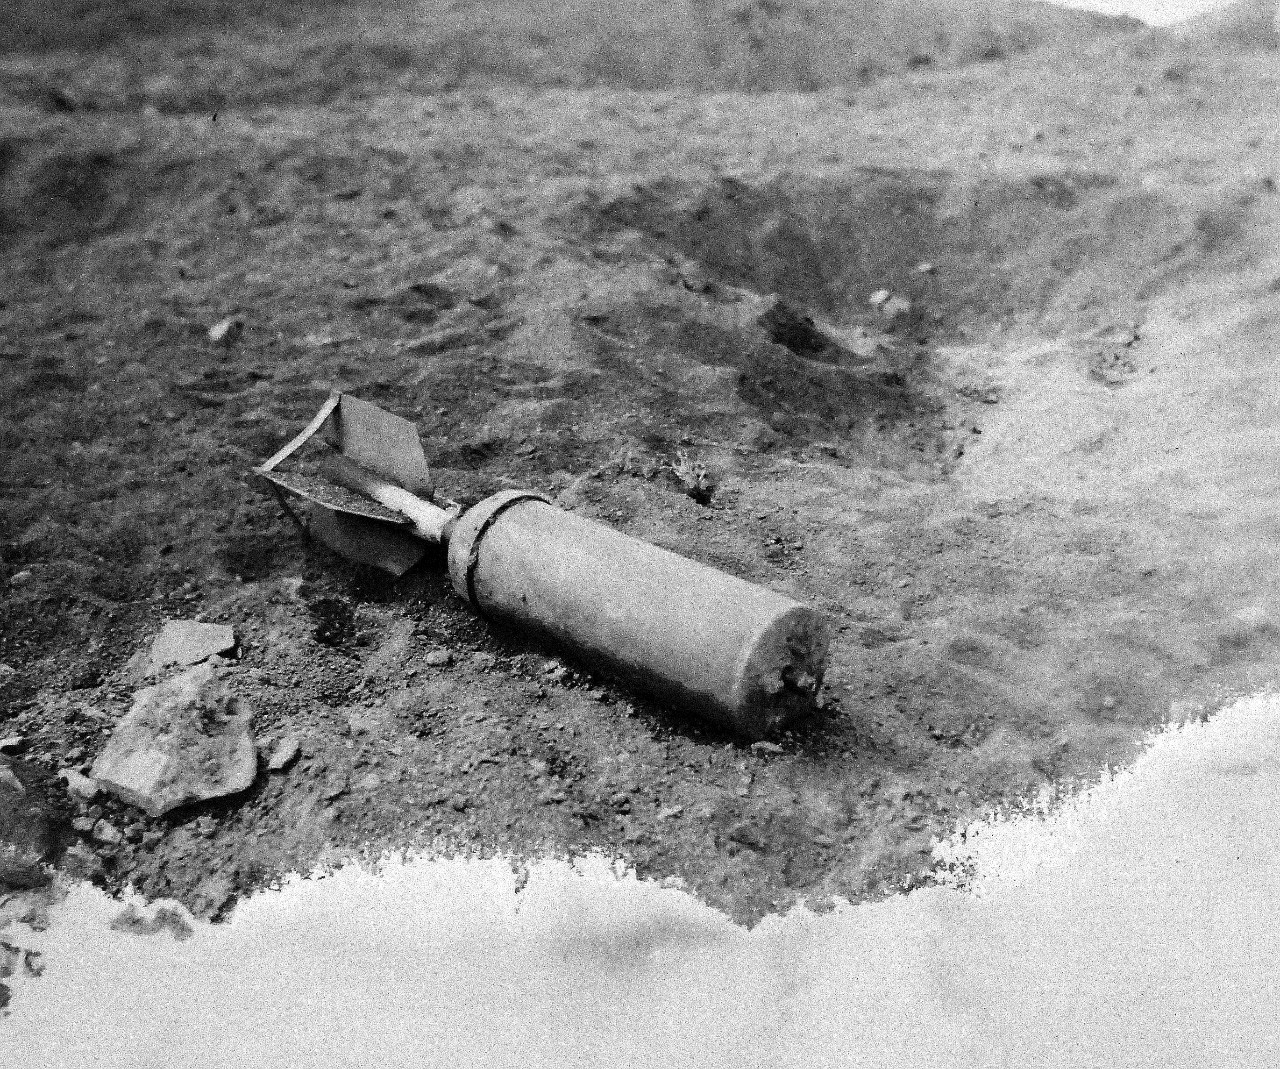 127-GW-304-139732:  Battle for Iwo Jima, February-March 1945.   Japanese rocket ten inches in diameter. Photographed Corporal T.G. Burgess, February 28, 1945.  U.S. Marine Corps photograph, now in the collections of the National Archives.  (2016/02/17). Note, photograph is damaged.  